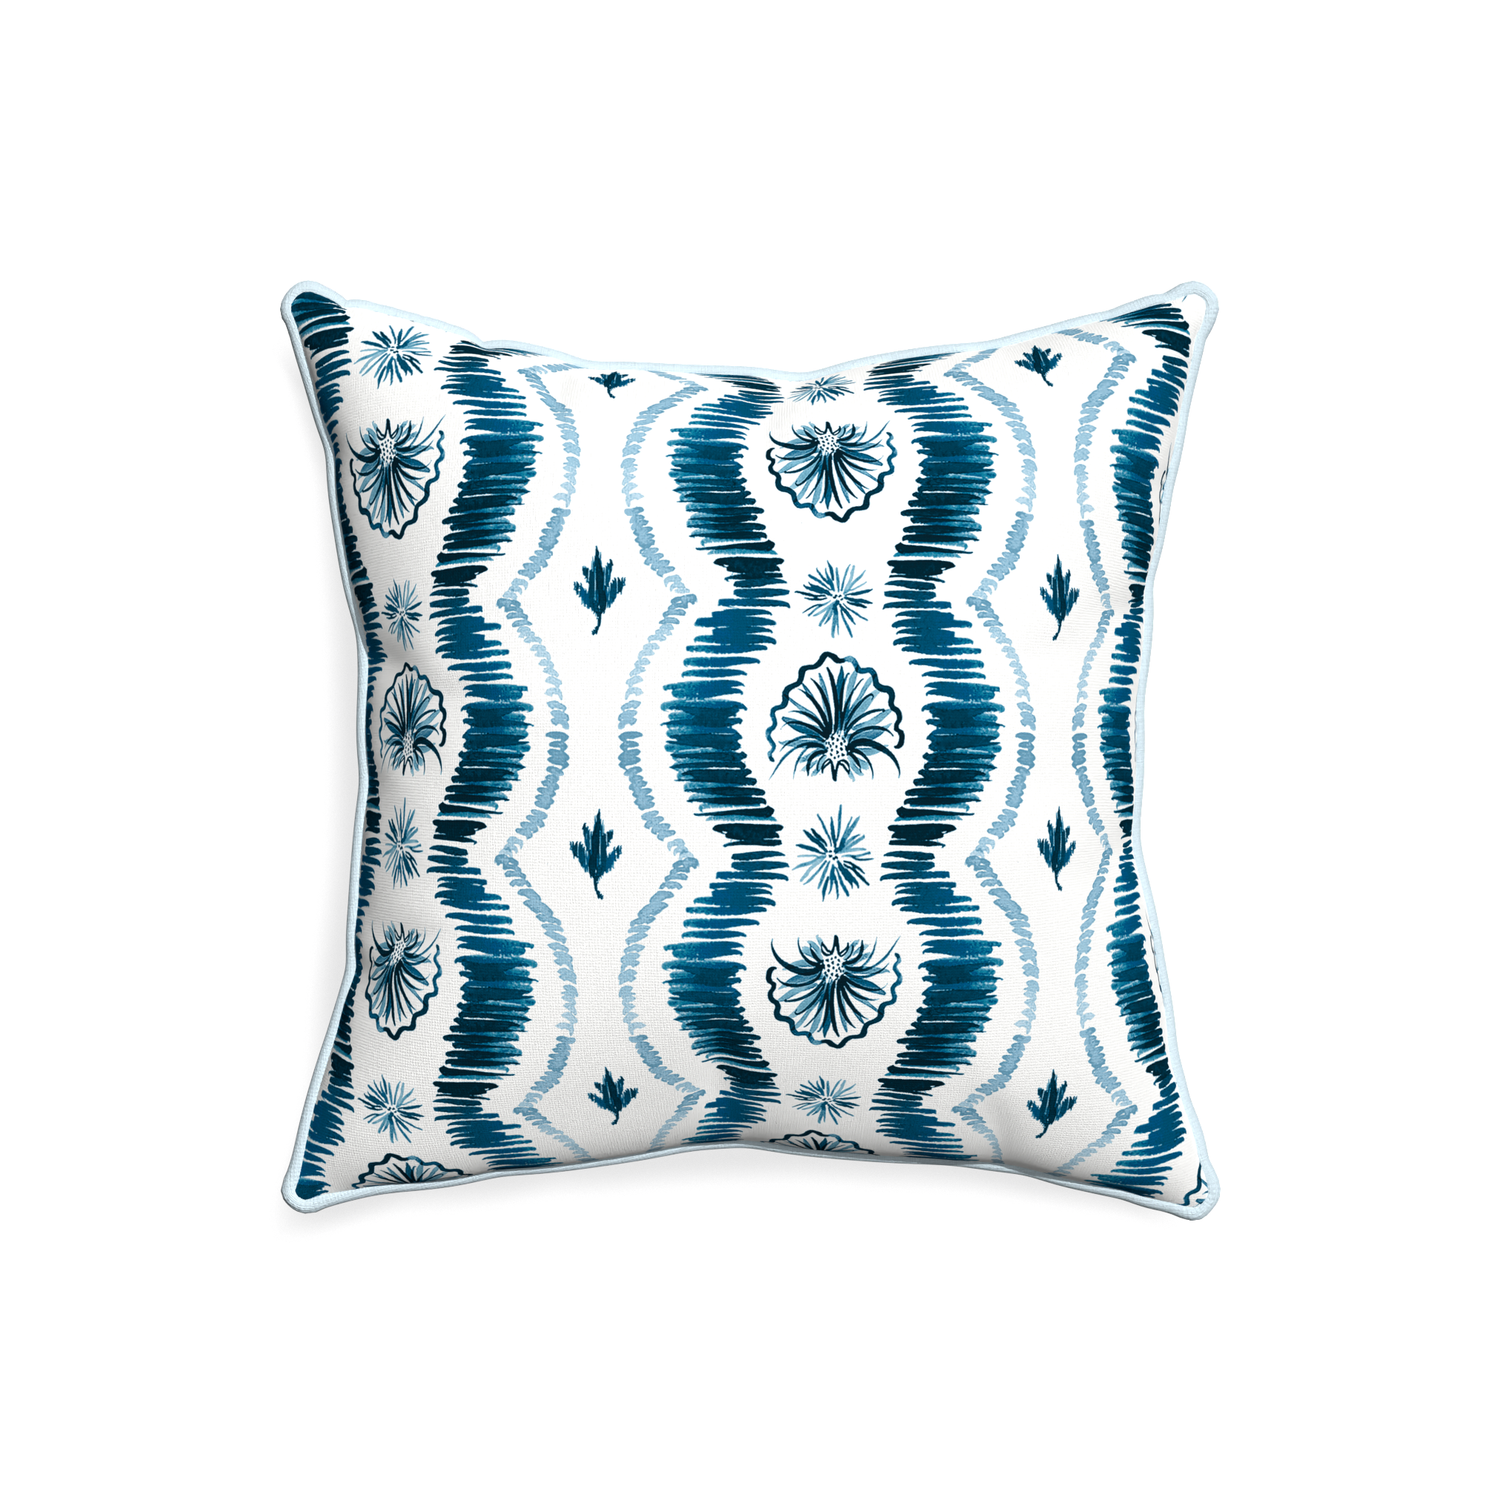 20-square alice custom blue ikatpillow with powder piping on white background